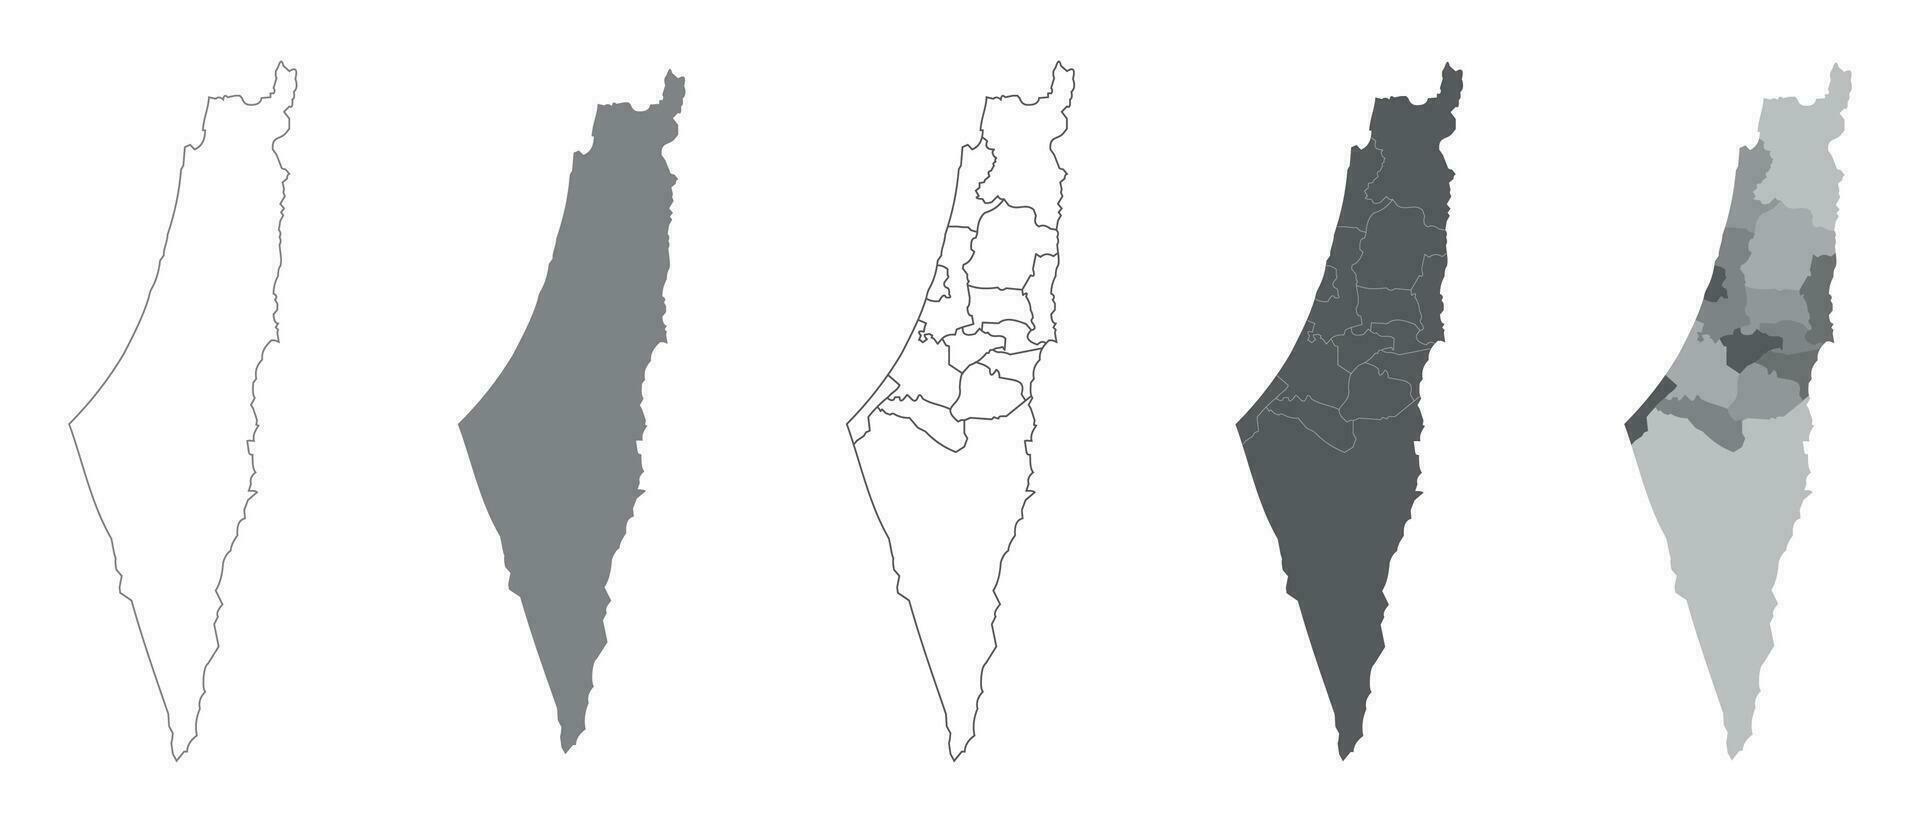 Set map of palestine. Detailed map of palestine. Grey silhouette. Palestine map. Vector illustration